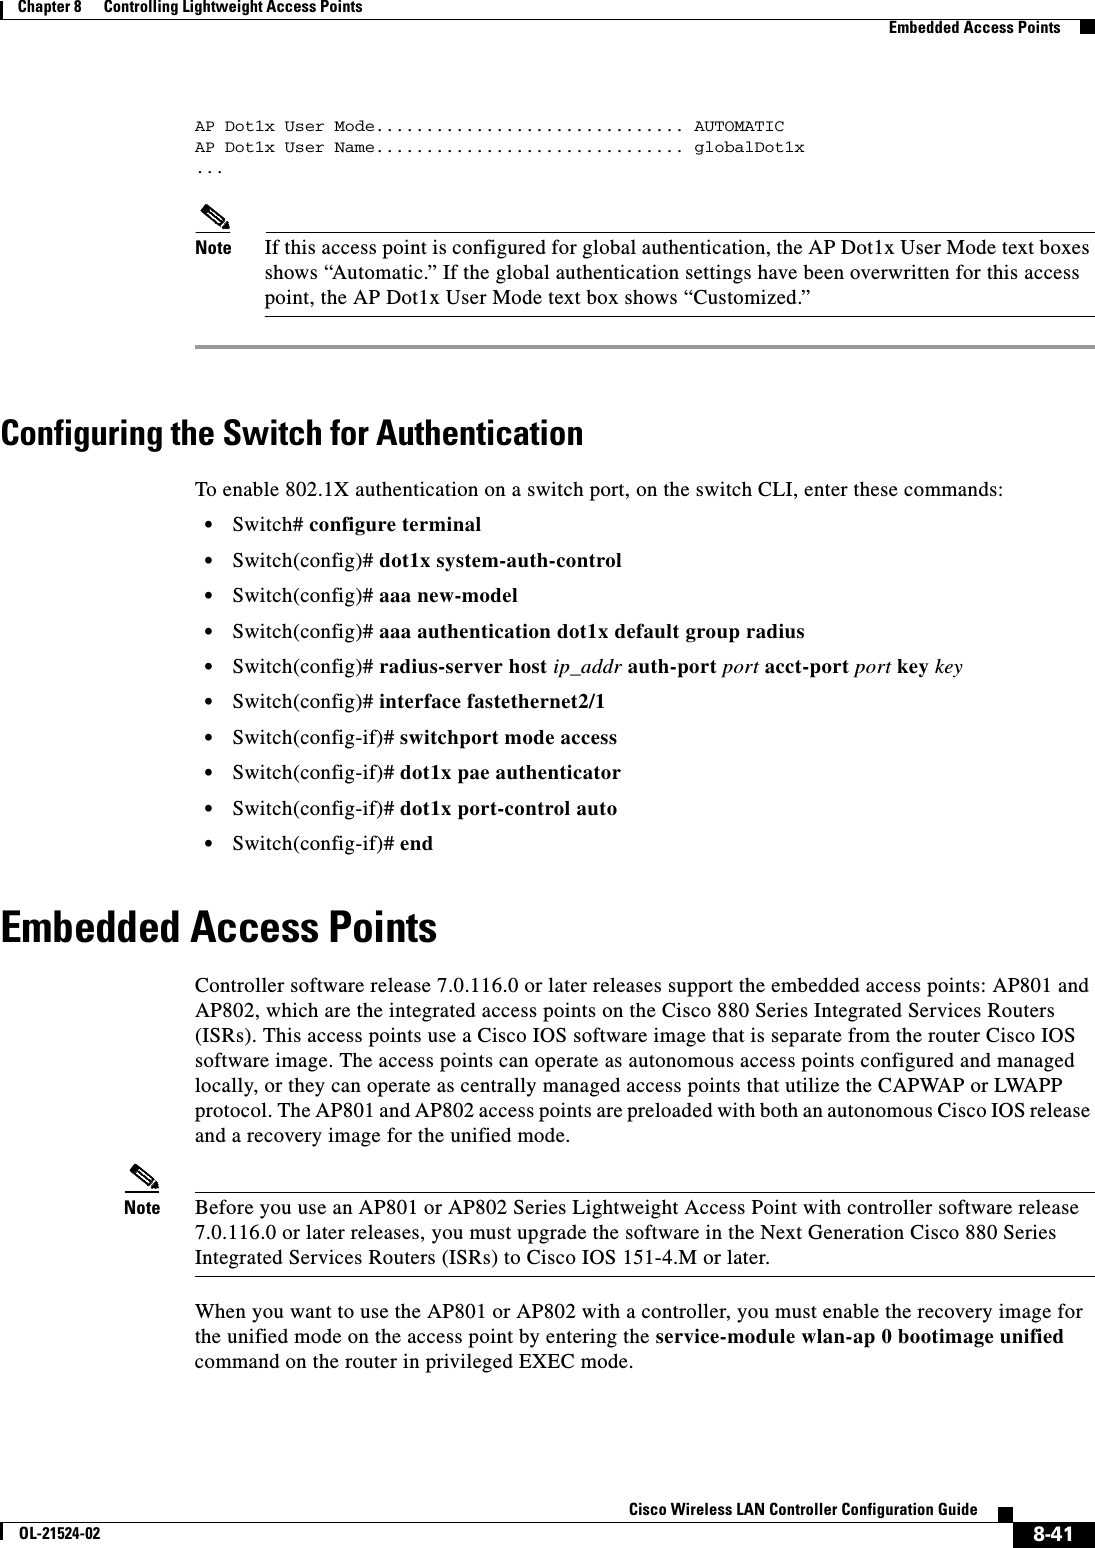  8-41Cisco Wireless LAN Controller Configuration GuideOL-21524-02Chapter 8      Controlling Lightweight Access Points  Embedded Access PointsAP Dot1x User Mode............................... AUTOMATICAP Dot1x User Name............................... globalDot1x...Note If this access point is configured for global authentication, the AP Dot1x User Mode text boxes shows “Automatic.” If the global authentication settings have been overwritten for this access point, the AP Dot1x User Mode text box shows “Customized.”Configuring the Switch for AuthenticationTo enable 802.1X authentication on a switch port, on the switch CLI, enter these commands:  • Switch# configure terminal  • Switch(config)# dot1x system-auth-control  • Switch(config)# aaa new-model  • Switch(config)# aaa authentication dot1x default group radius  • Switch(config)# radius-server host ip_addr auth-port port acct-port port key key  • Switch(config)# interface fastethernet2/1  • Switch(config-if)# switchport mode access  • Switch(config-if)# dot1x pae authenticator  • Switch(config-if)# dot1x port-control auto  • Switch(config-if)# endEmbedded Access PointsController software release 7.0.116.0 or later releases support the embedded access points: AP801 and AP802, which are the integrated access points on the Cisco 880 Series Integrated Services Routers (ISRs). This access points use a Cisco IOS software image that is separate from the router Cisco IOS software image. The access points can operate as autonomous access points configured and managed locally, or they can operate as centrally managed access points that utilize the CAPWAP or LWAPP protocol. The AP801 and AP802 access points are preloaded with both an autonomous Cisco IOS release and a recovery image for the unified mode.Note Before you use an AP801 or AP802 Series Lightweight Access Point with controller software release 7.0.116.0 or later releases, you must upgrade the software in the Next Generation Cisco 880 Series Integrated Services Routers (ISRs) to Cisco IOS 151-4.M or later.When you want to use the AP801 or AP802 with a controller, you must enable the recovery image for the unified mode on the access point by entering the service-module wlan-ap 0 bootimage unified command on the router in privileged EXEC mode.